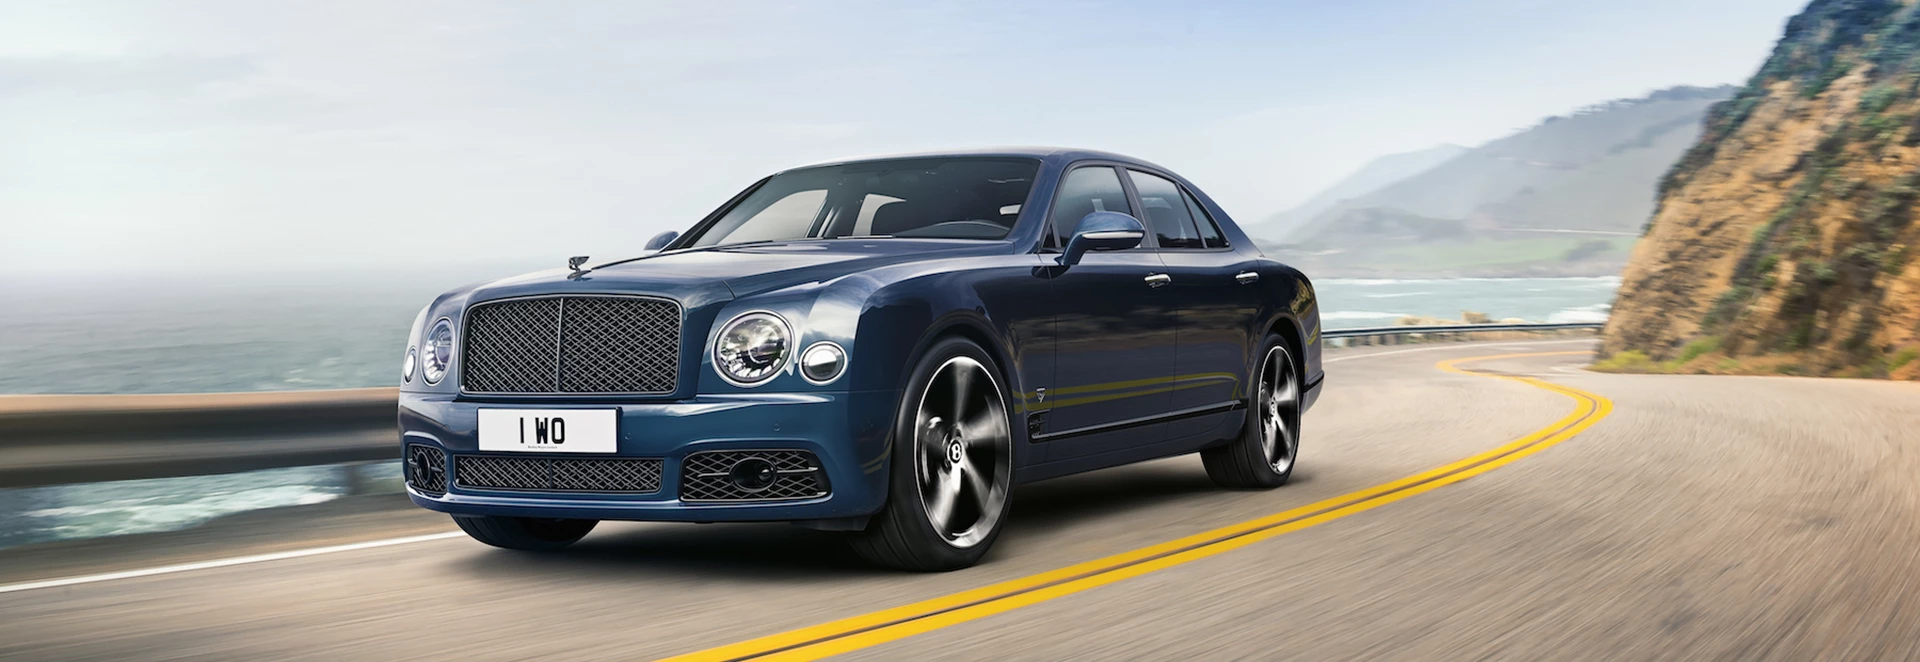 Bentley announces exclusive Mulsanne 6.75 Edition to end production of luxury limo